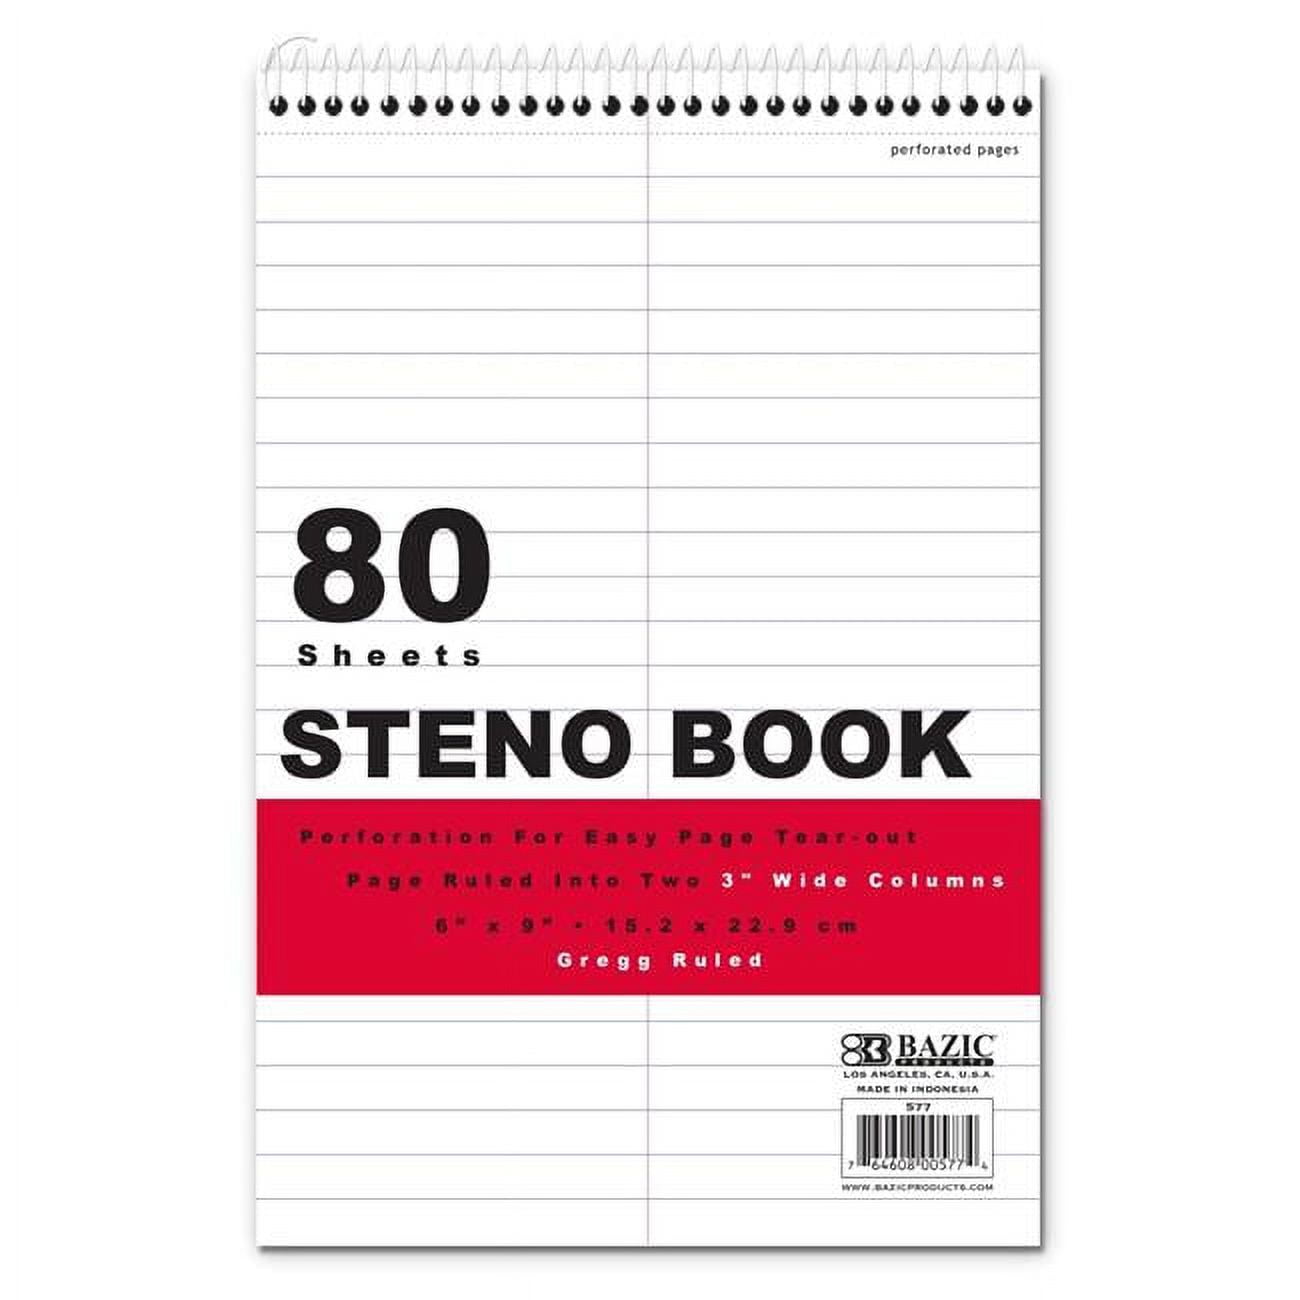 577 6 X 9 In. 80 Sheets White Paper Gregg Ruled Steno Book, Case Of 48